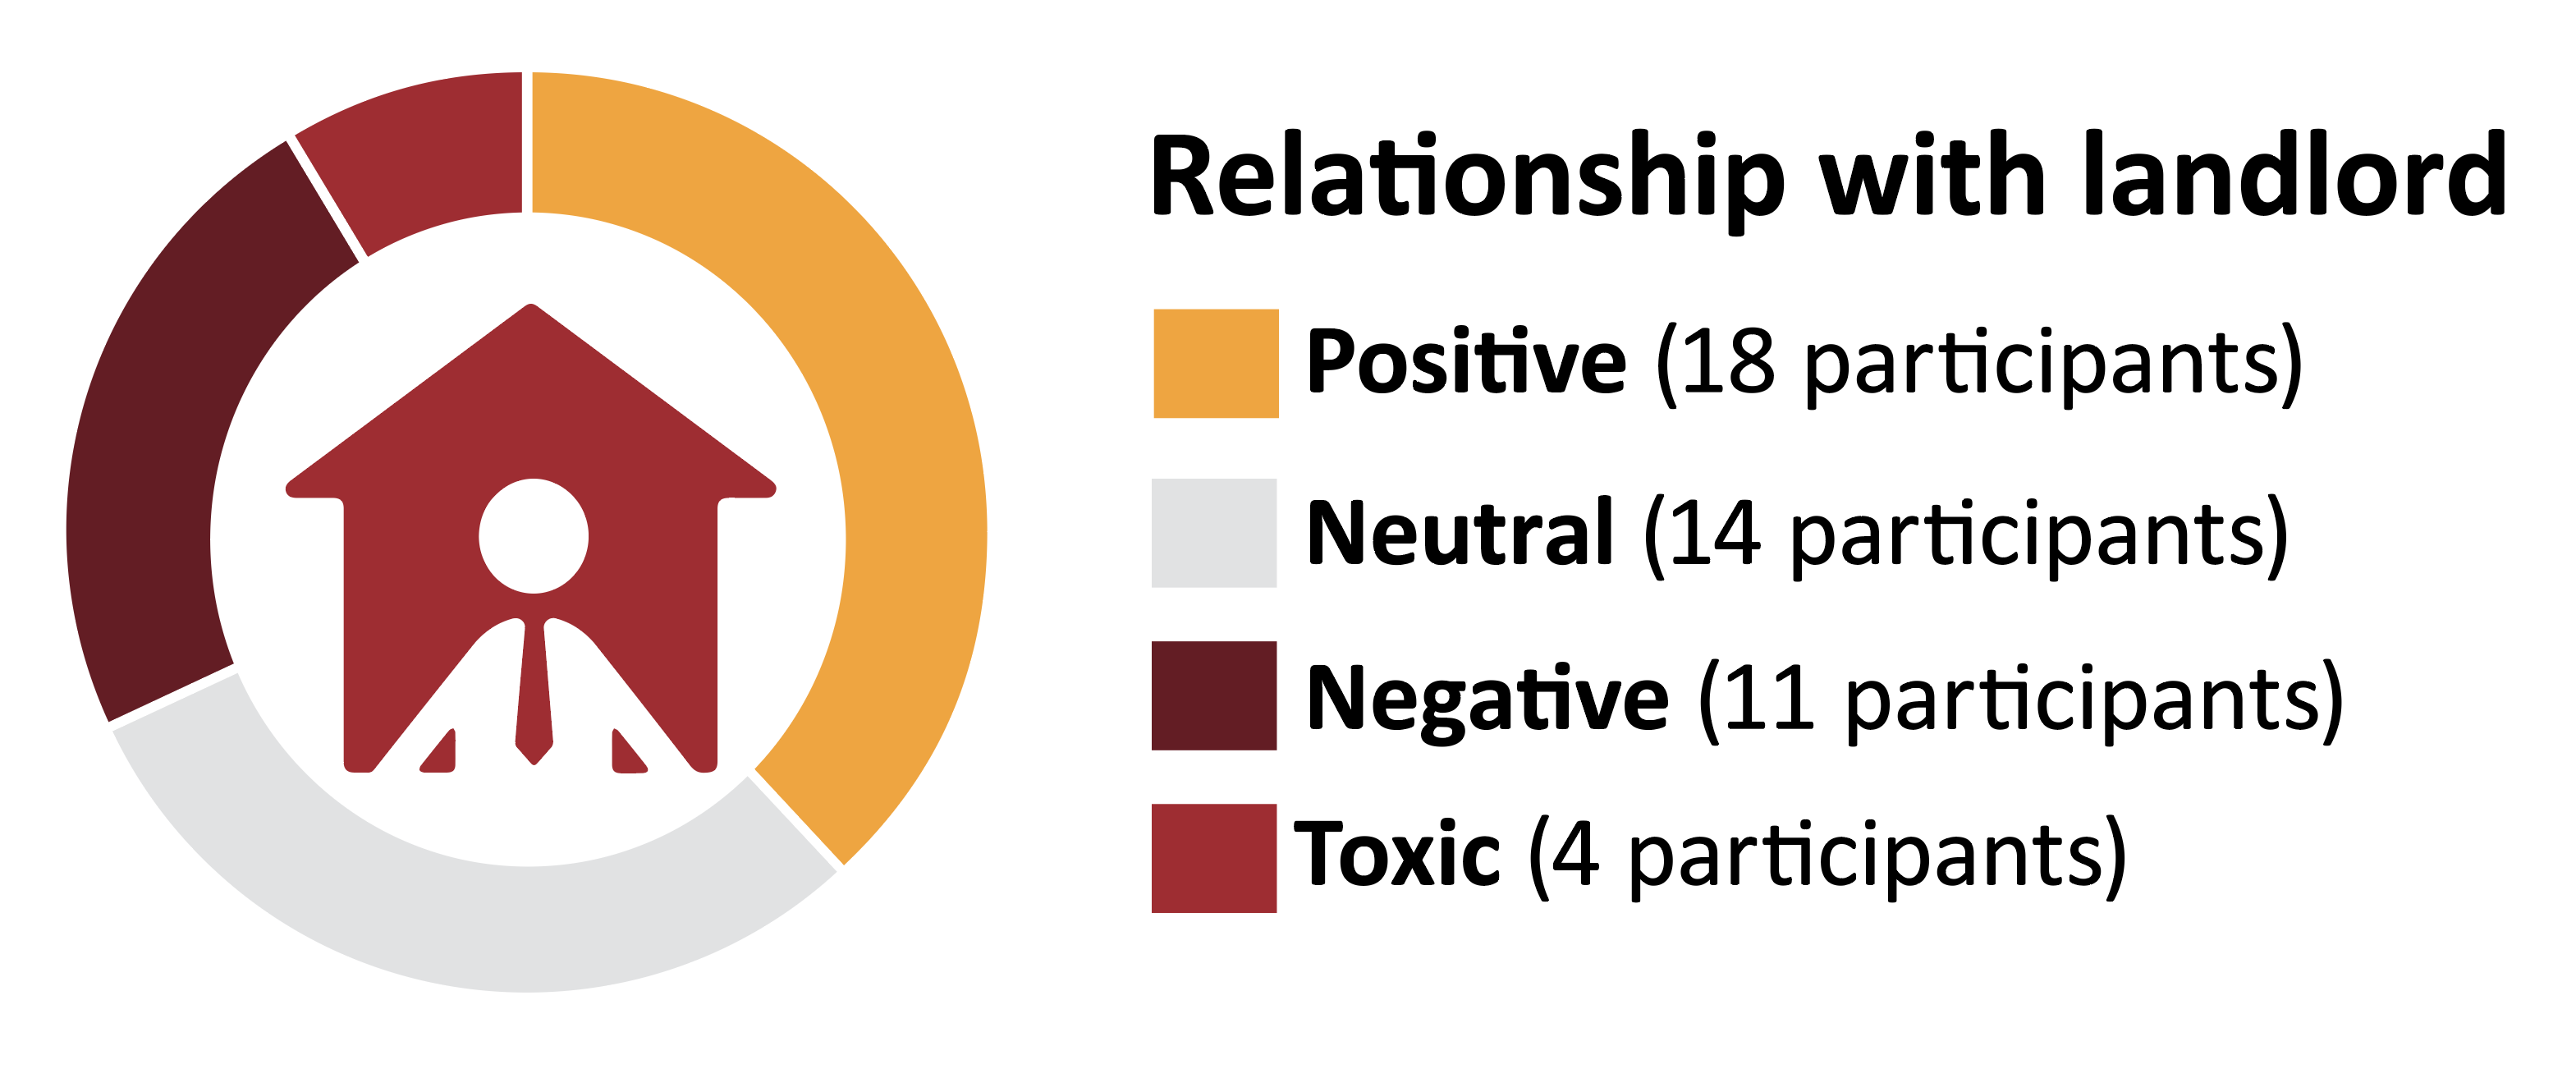 Relationship with landlord spectrum: Positive (18 participants), Neutral (14 participants), Negative (11 participants), Toxic (4 participants)